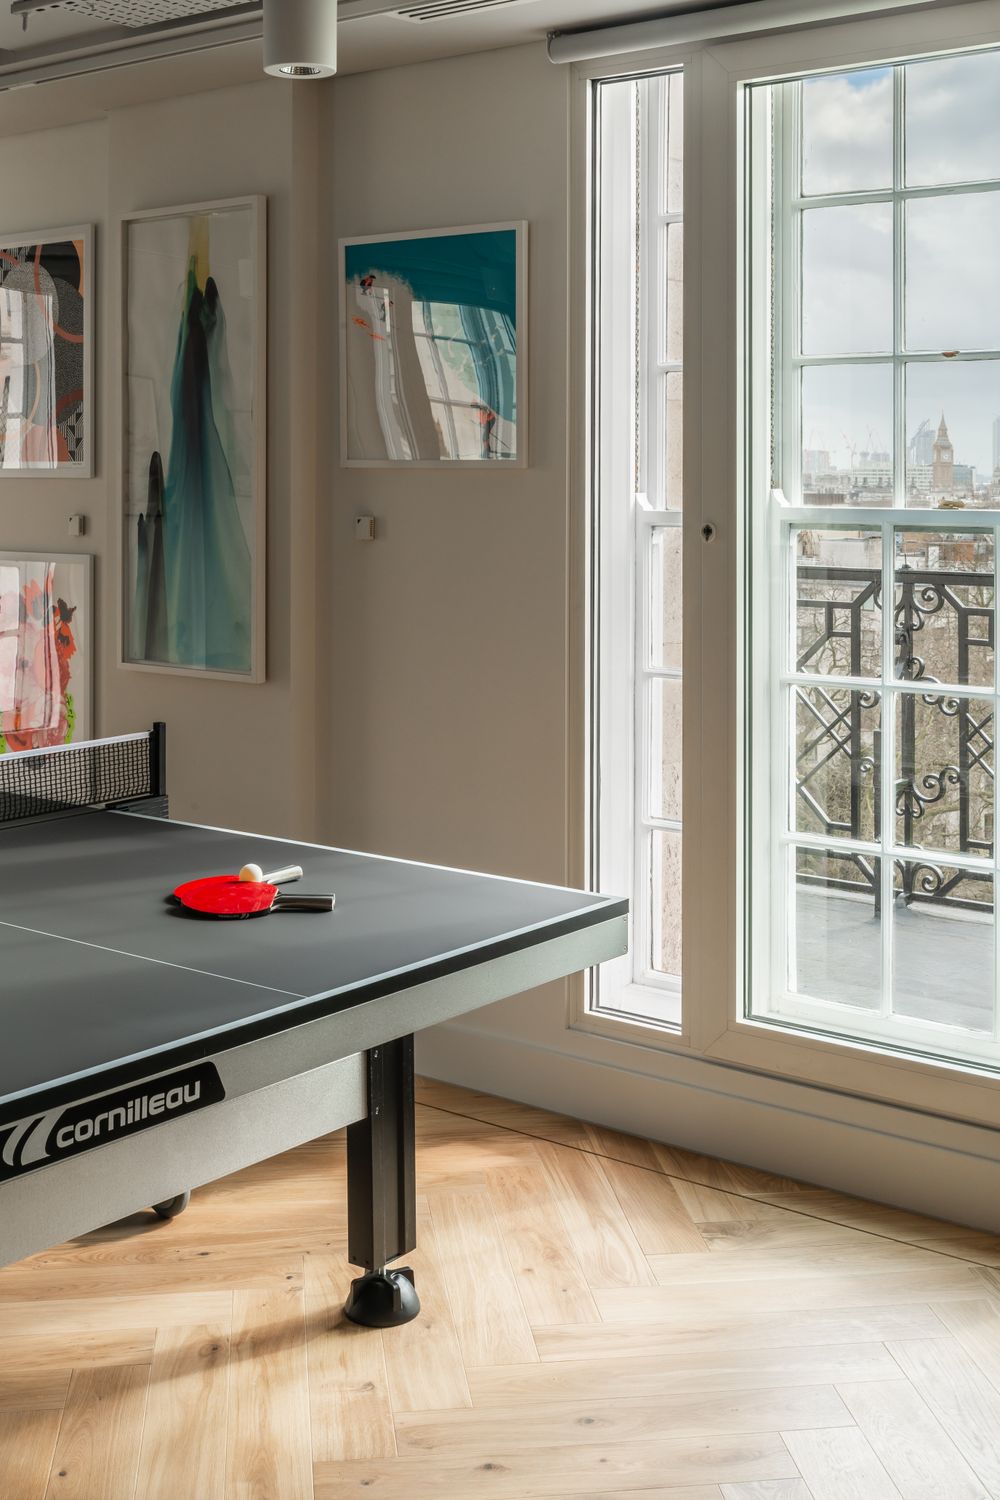 A ping-pong table and views over Green Park as seen from the café area.